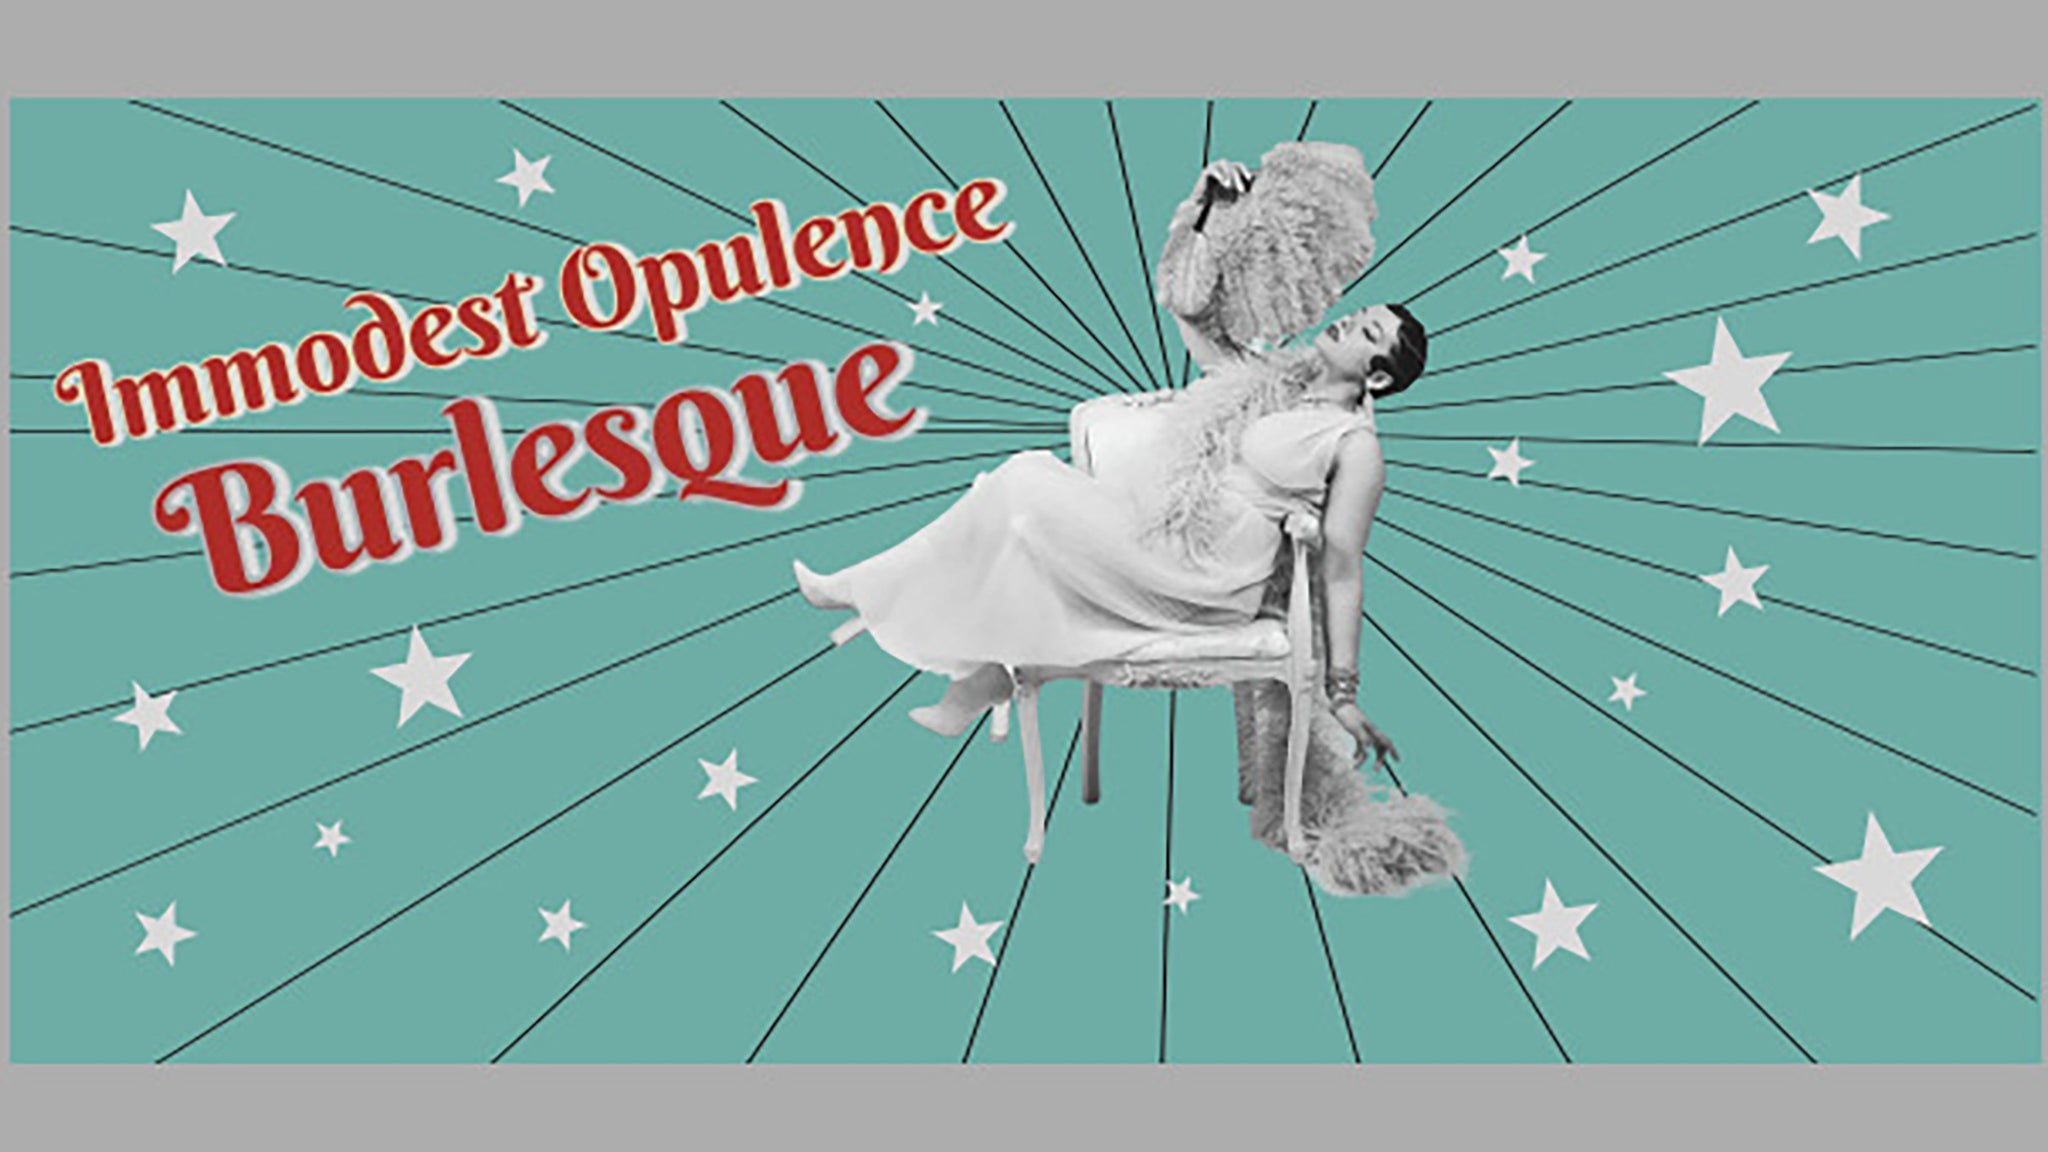 Immodest Opulence Burlesque (18+ Only!)